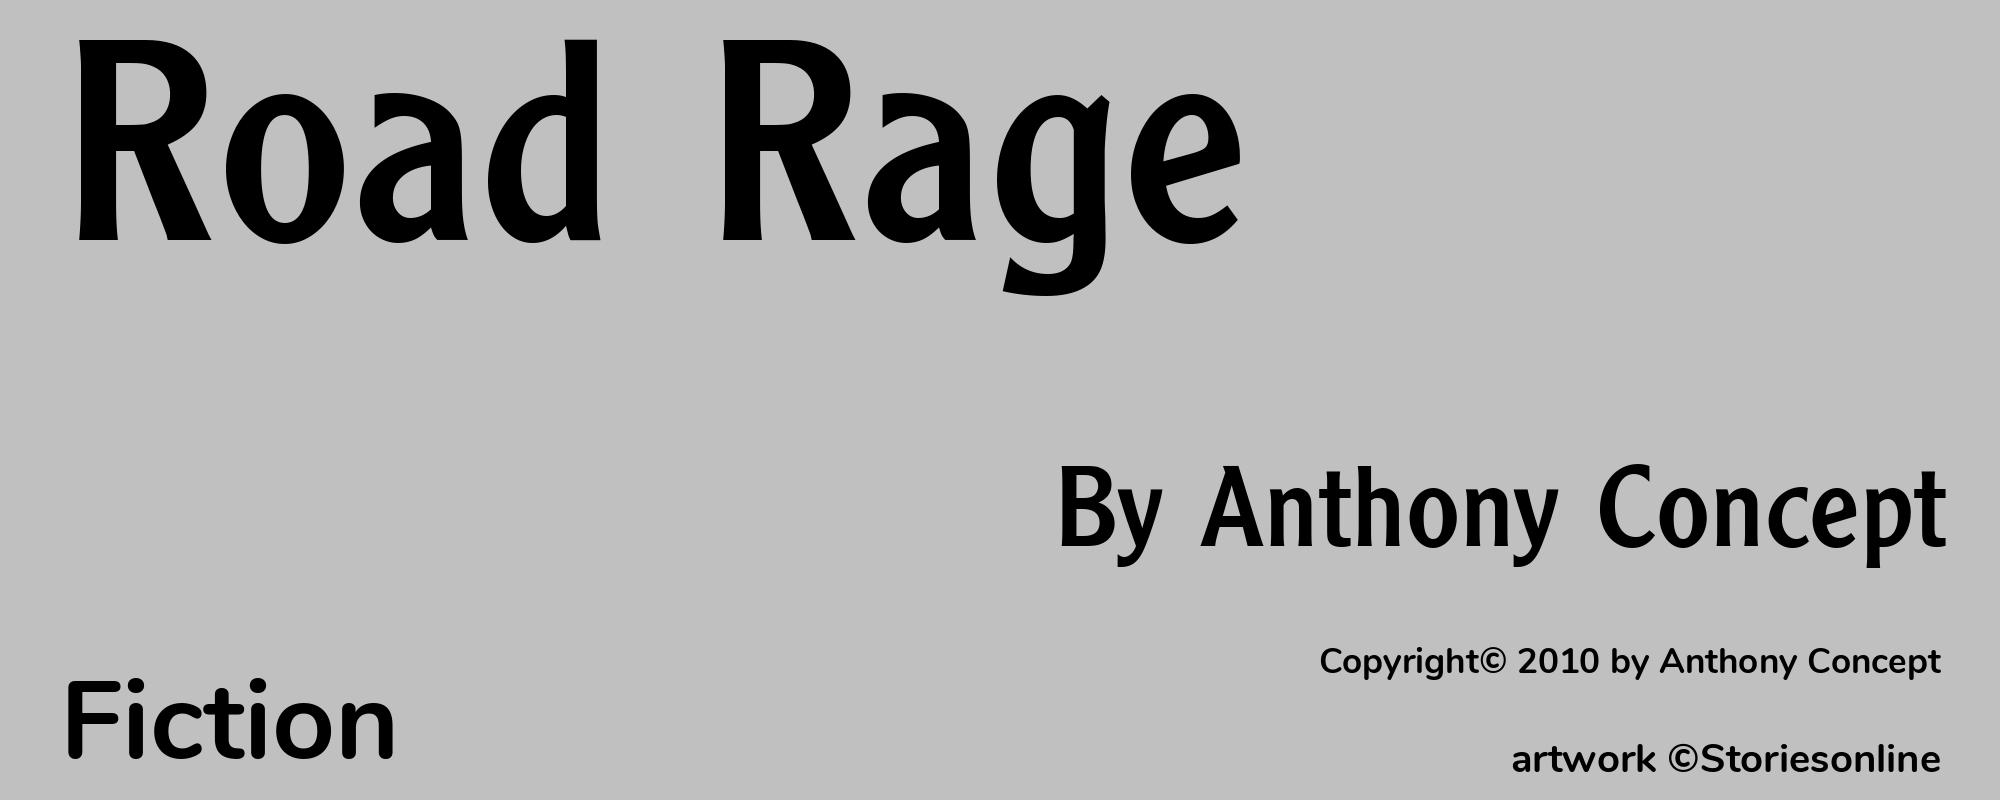 Road Rage - Cover